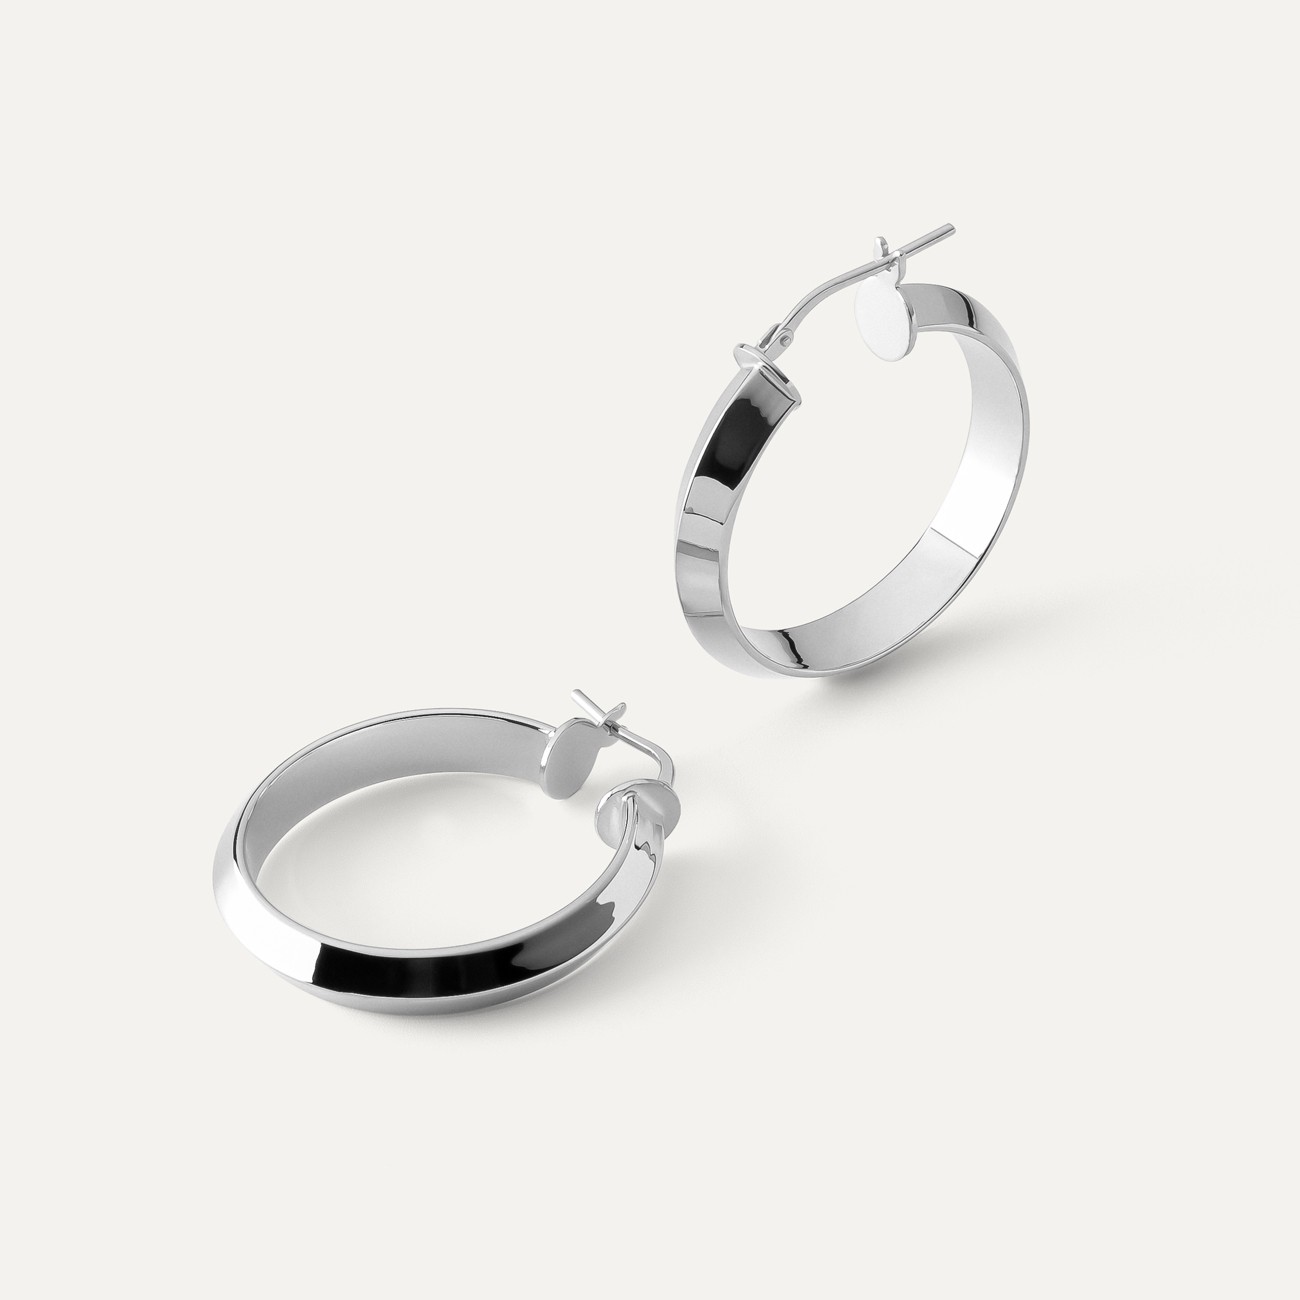 Round hoop earrings 1 cm with clasp, silver 925, XENIA x GIORRE